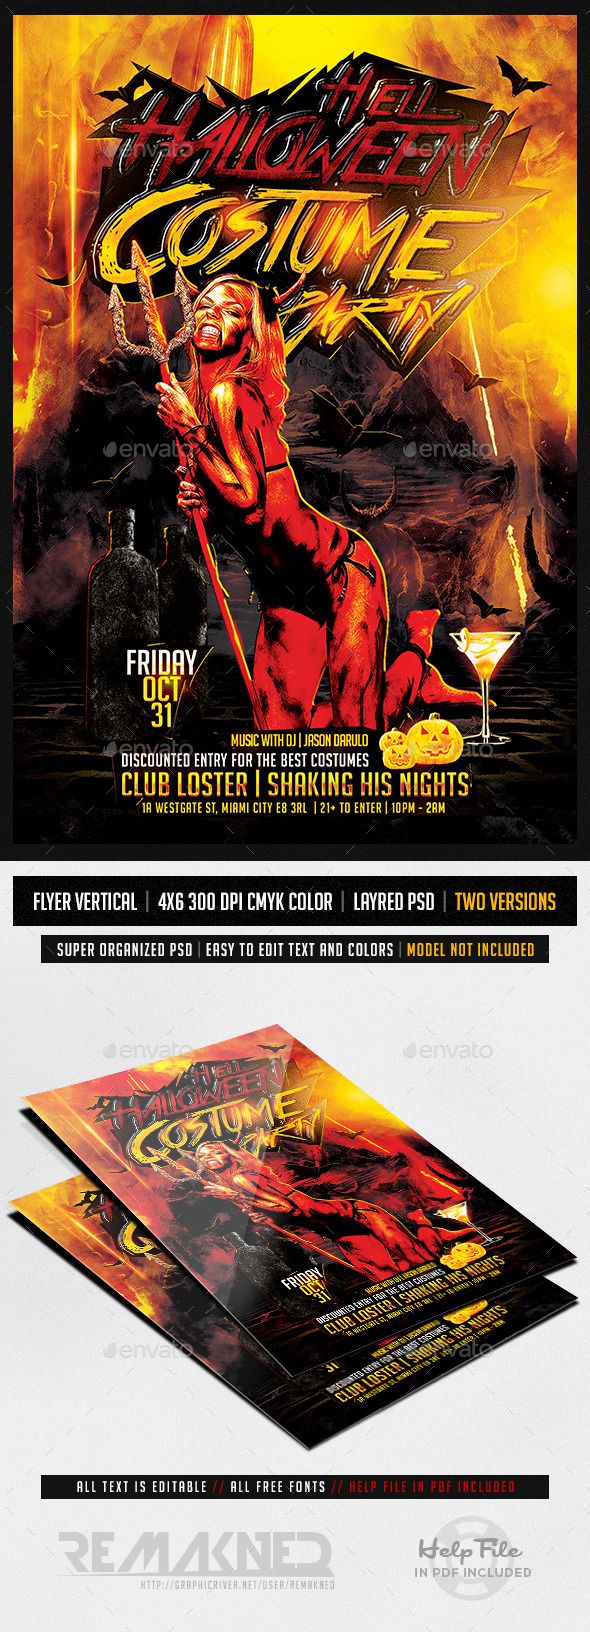 Hell Halloween Costume Party | Flyer Template PSD (Events)